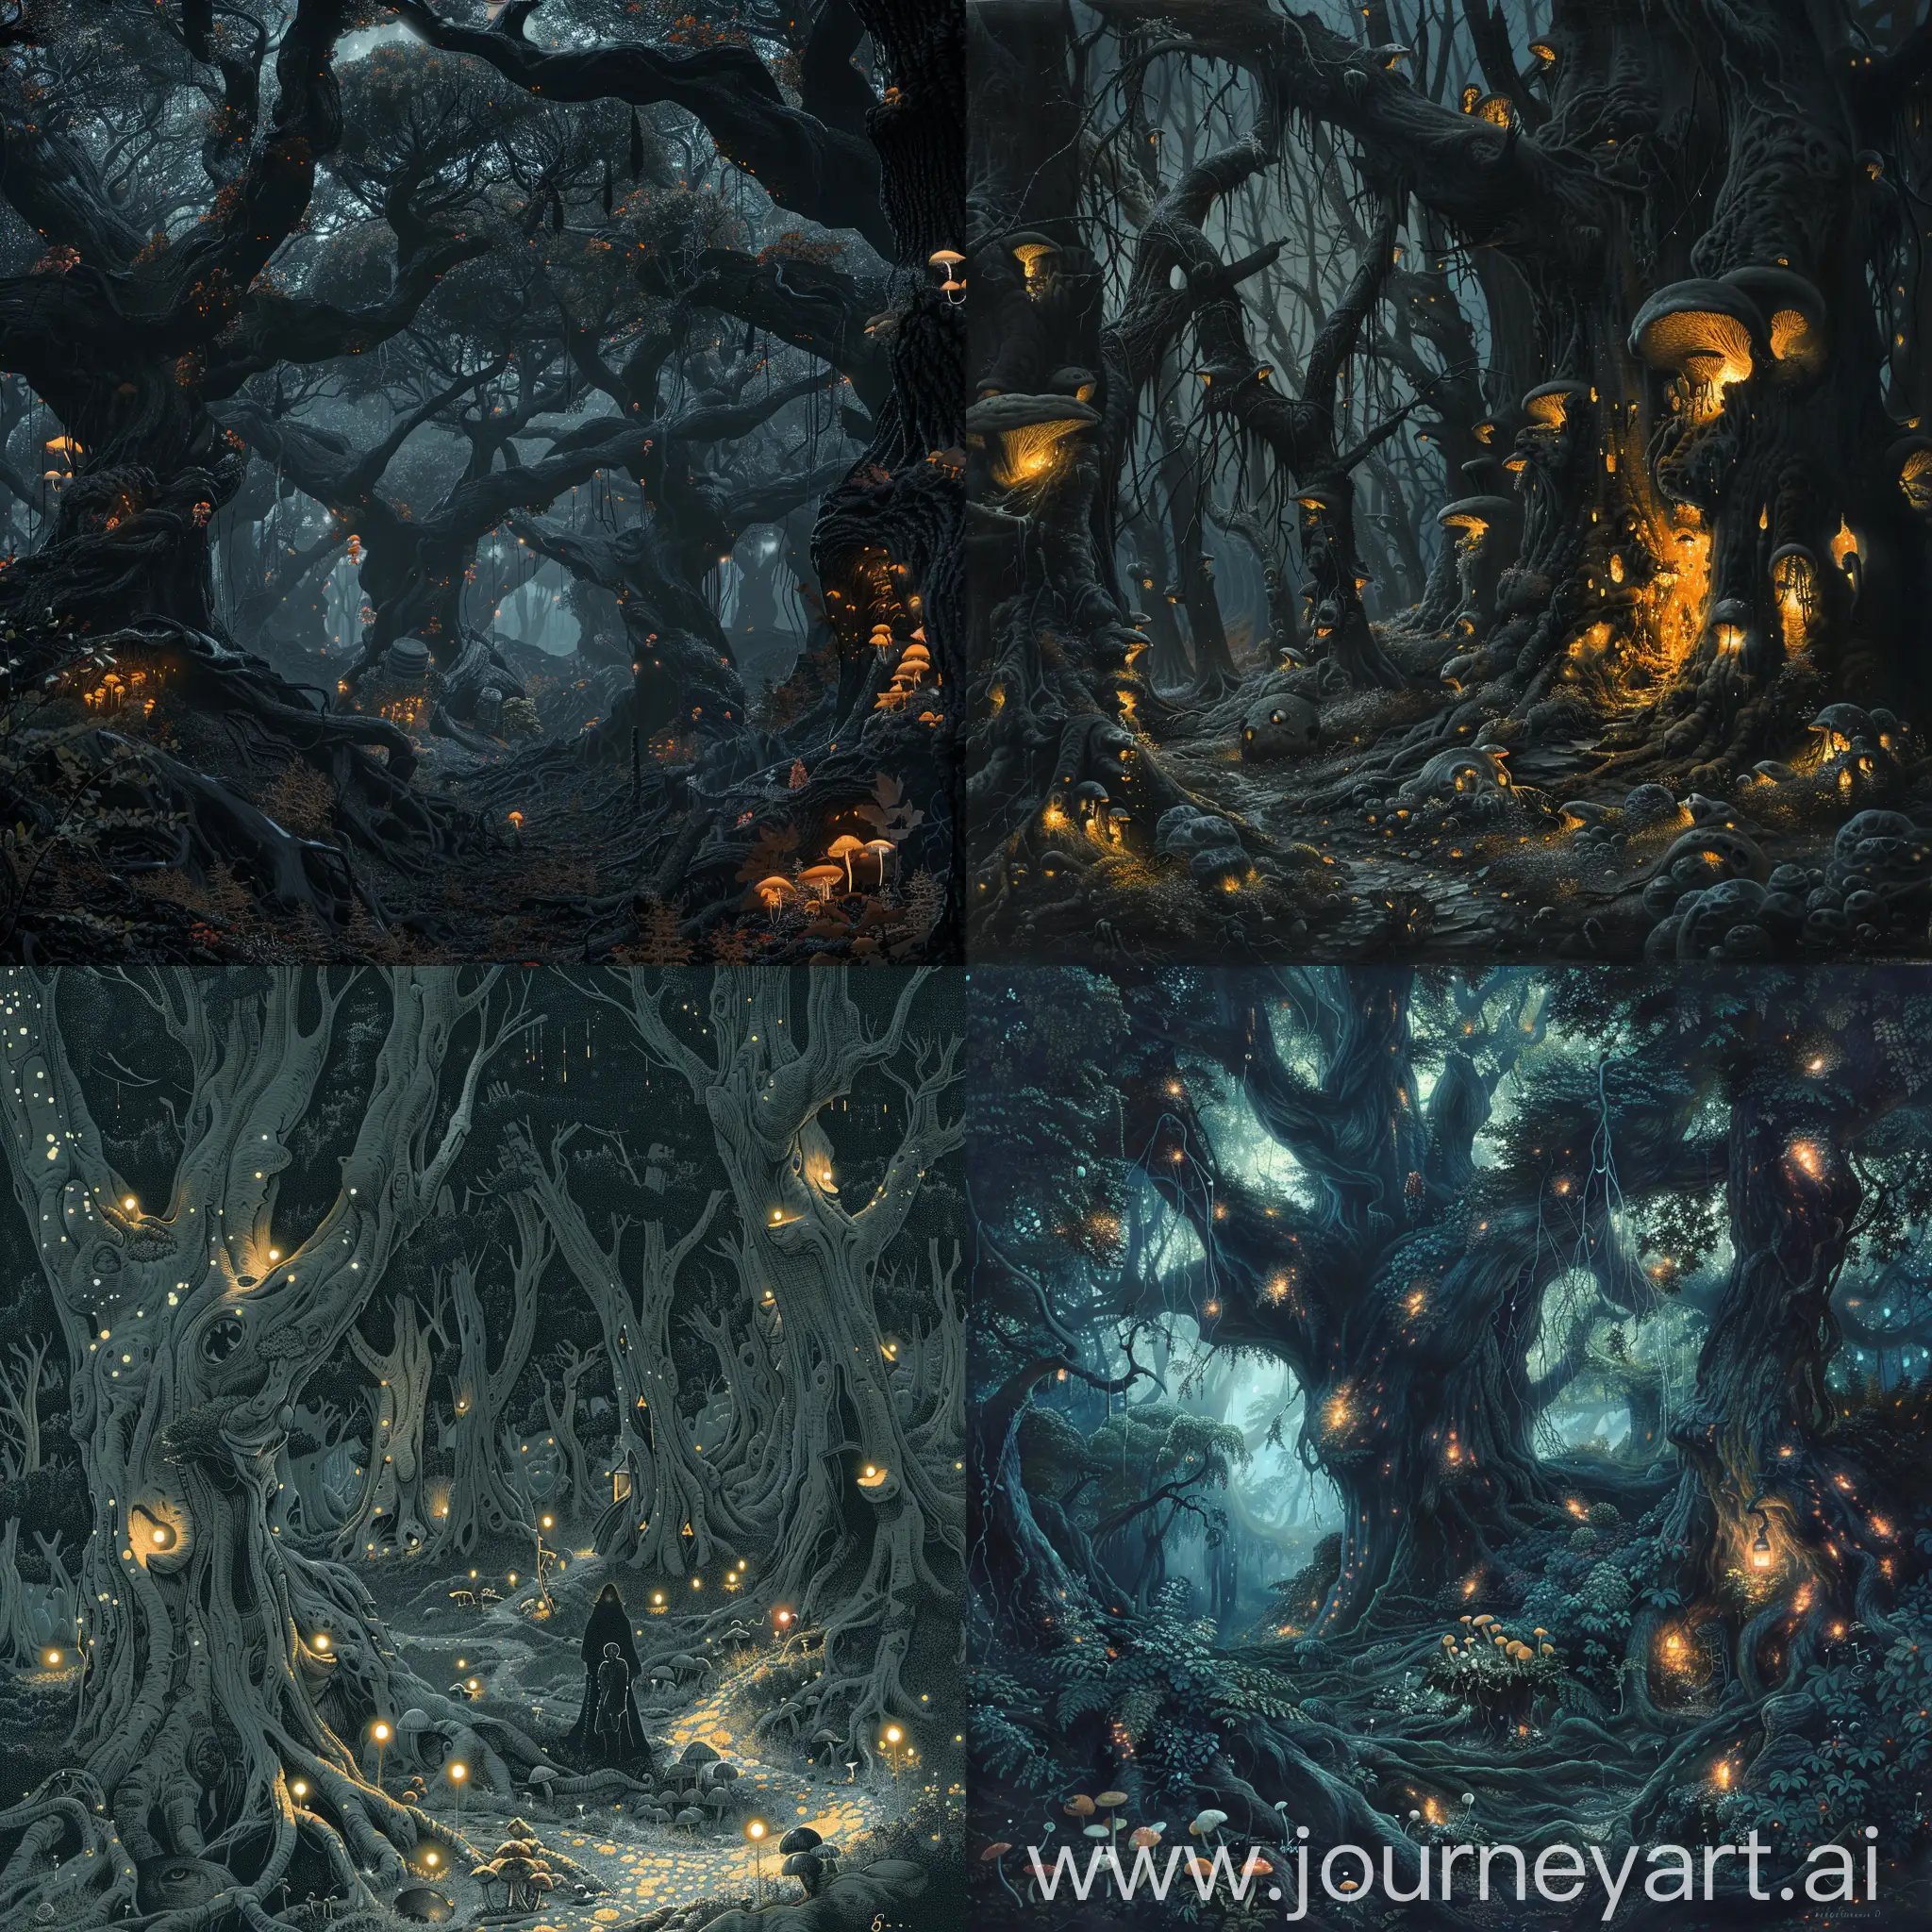 Enchanted-Dark-Forest-with-Glowing-Mushrooms-and-Strange-Creatures